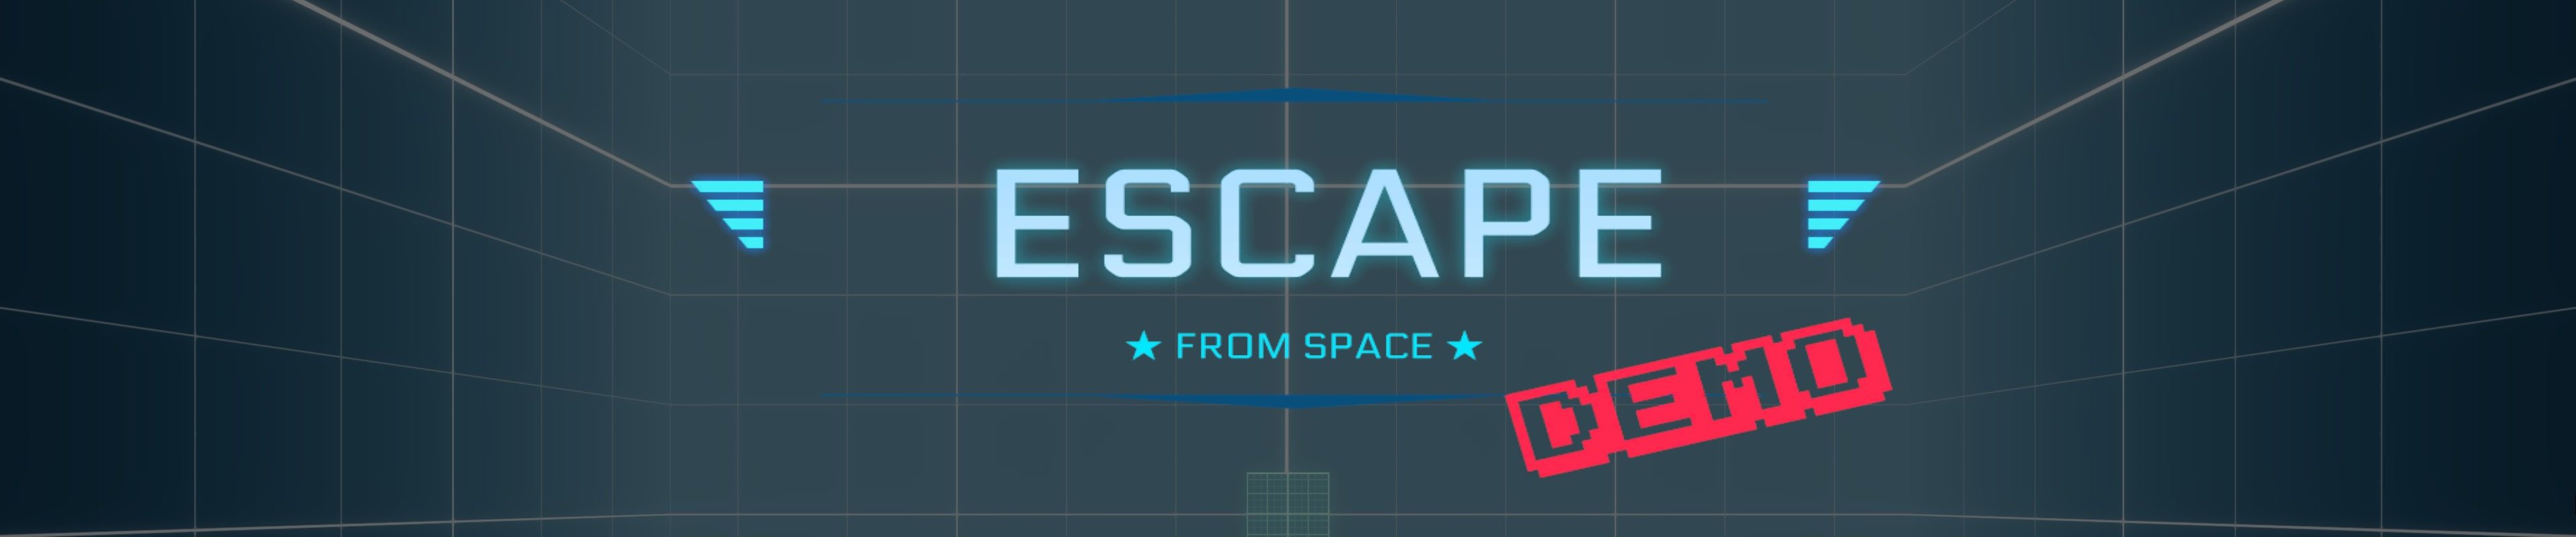 Ecape From Space